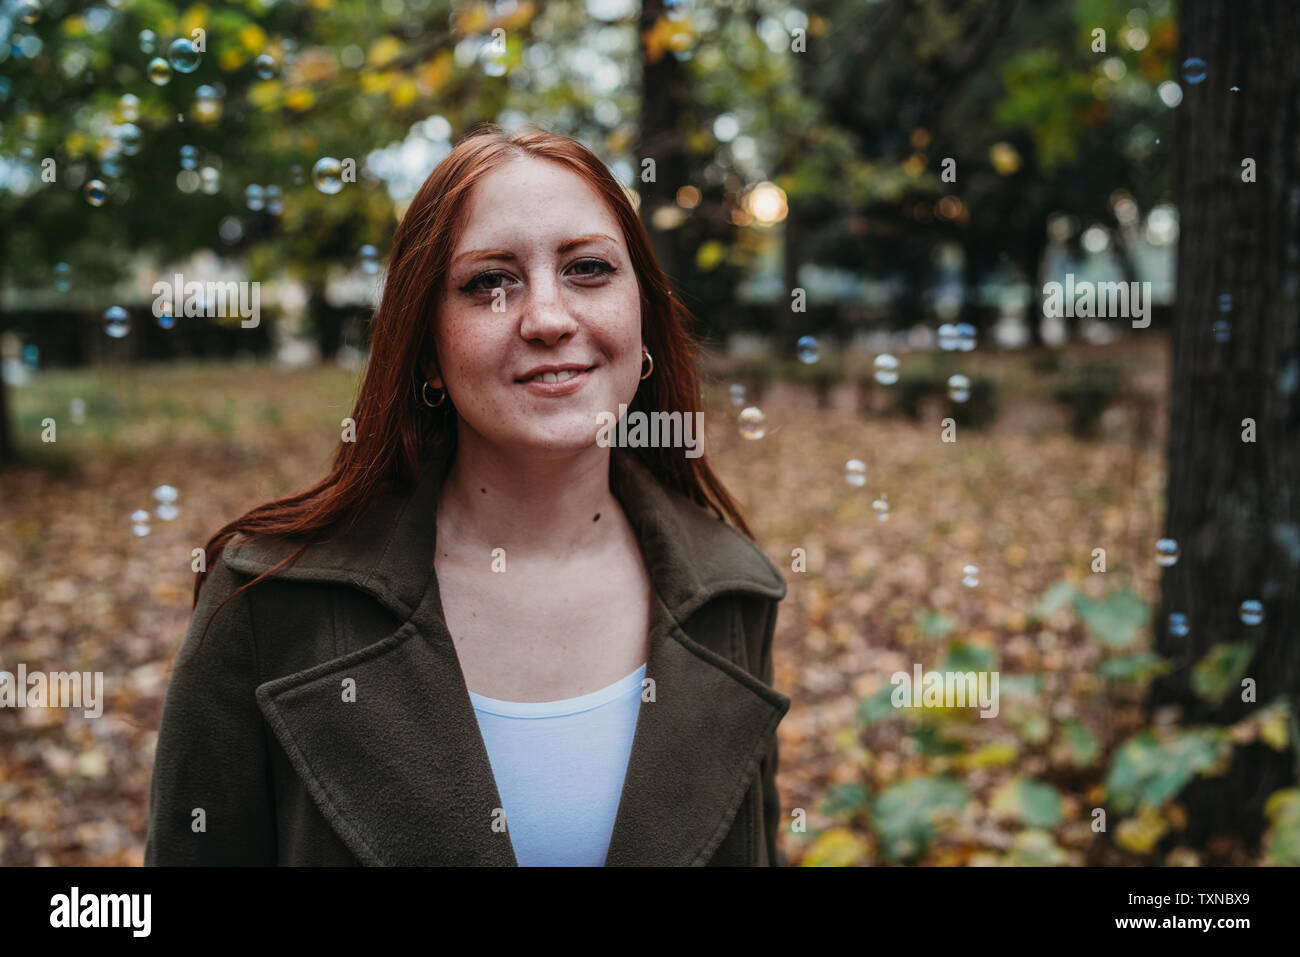 Young woman with long red hair amongst floating bubbles in autumn park, head and shoulder portrait Stock Photo